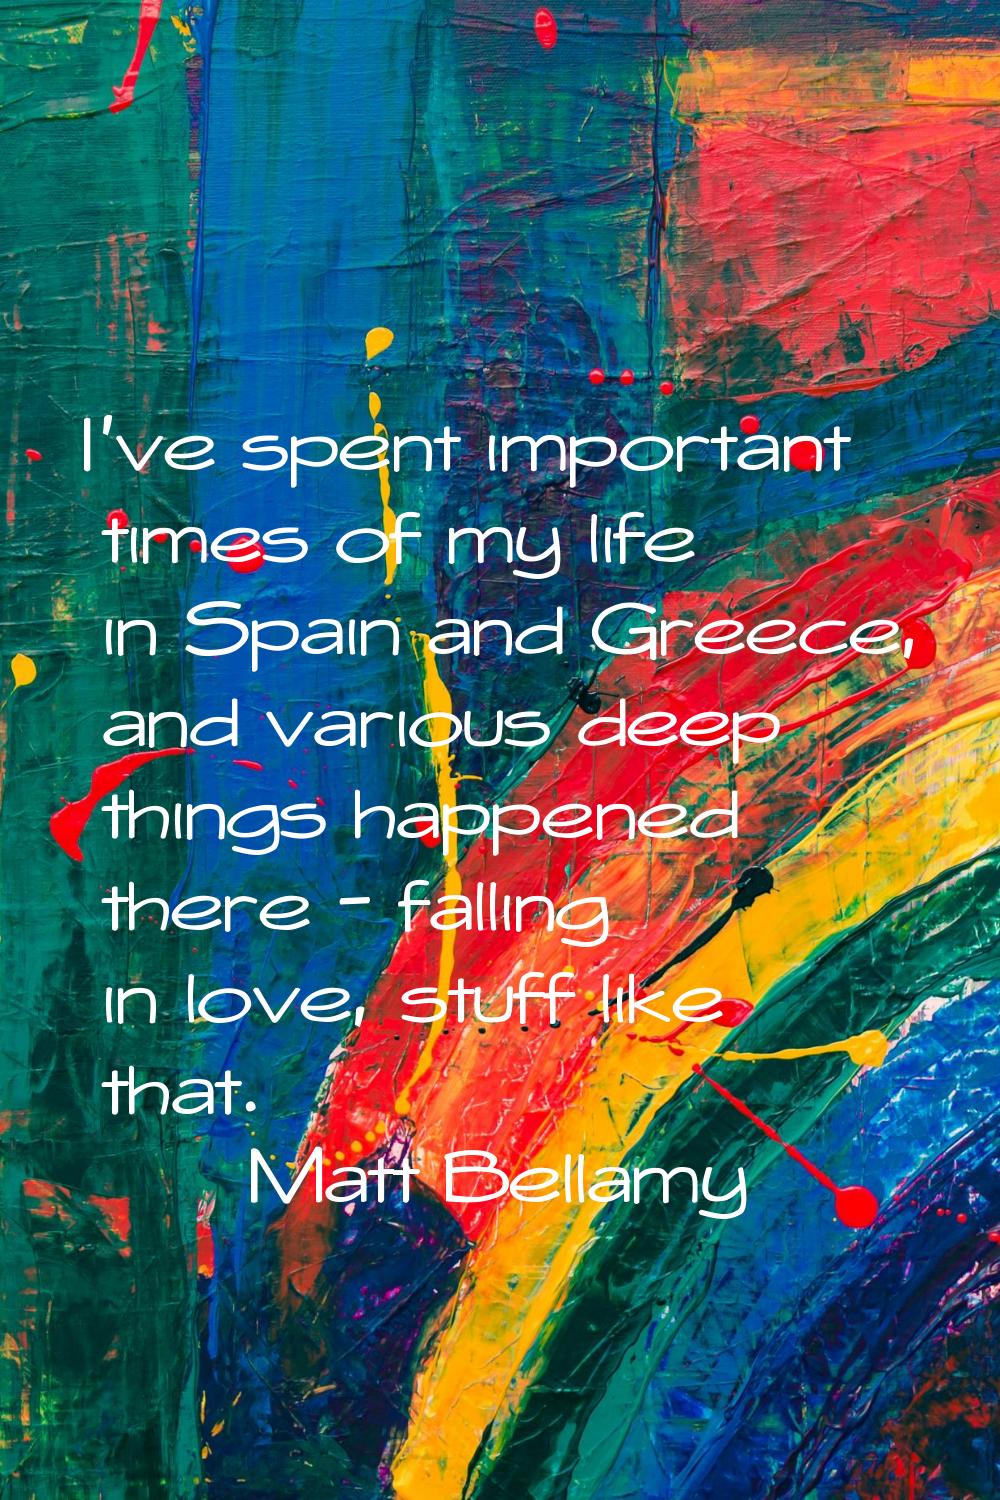 I've spent important times of my life in Spain and Greece, and various deep things happened there -